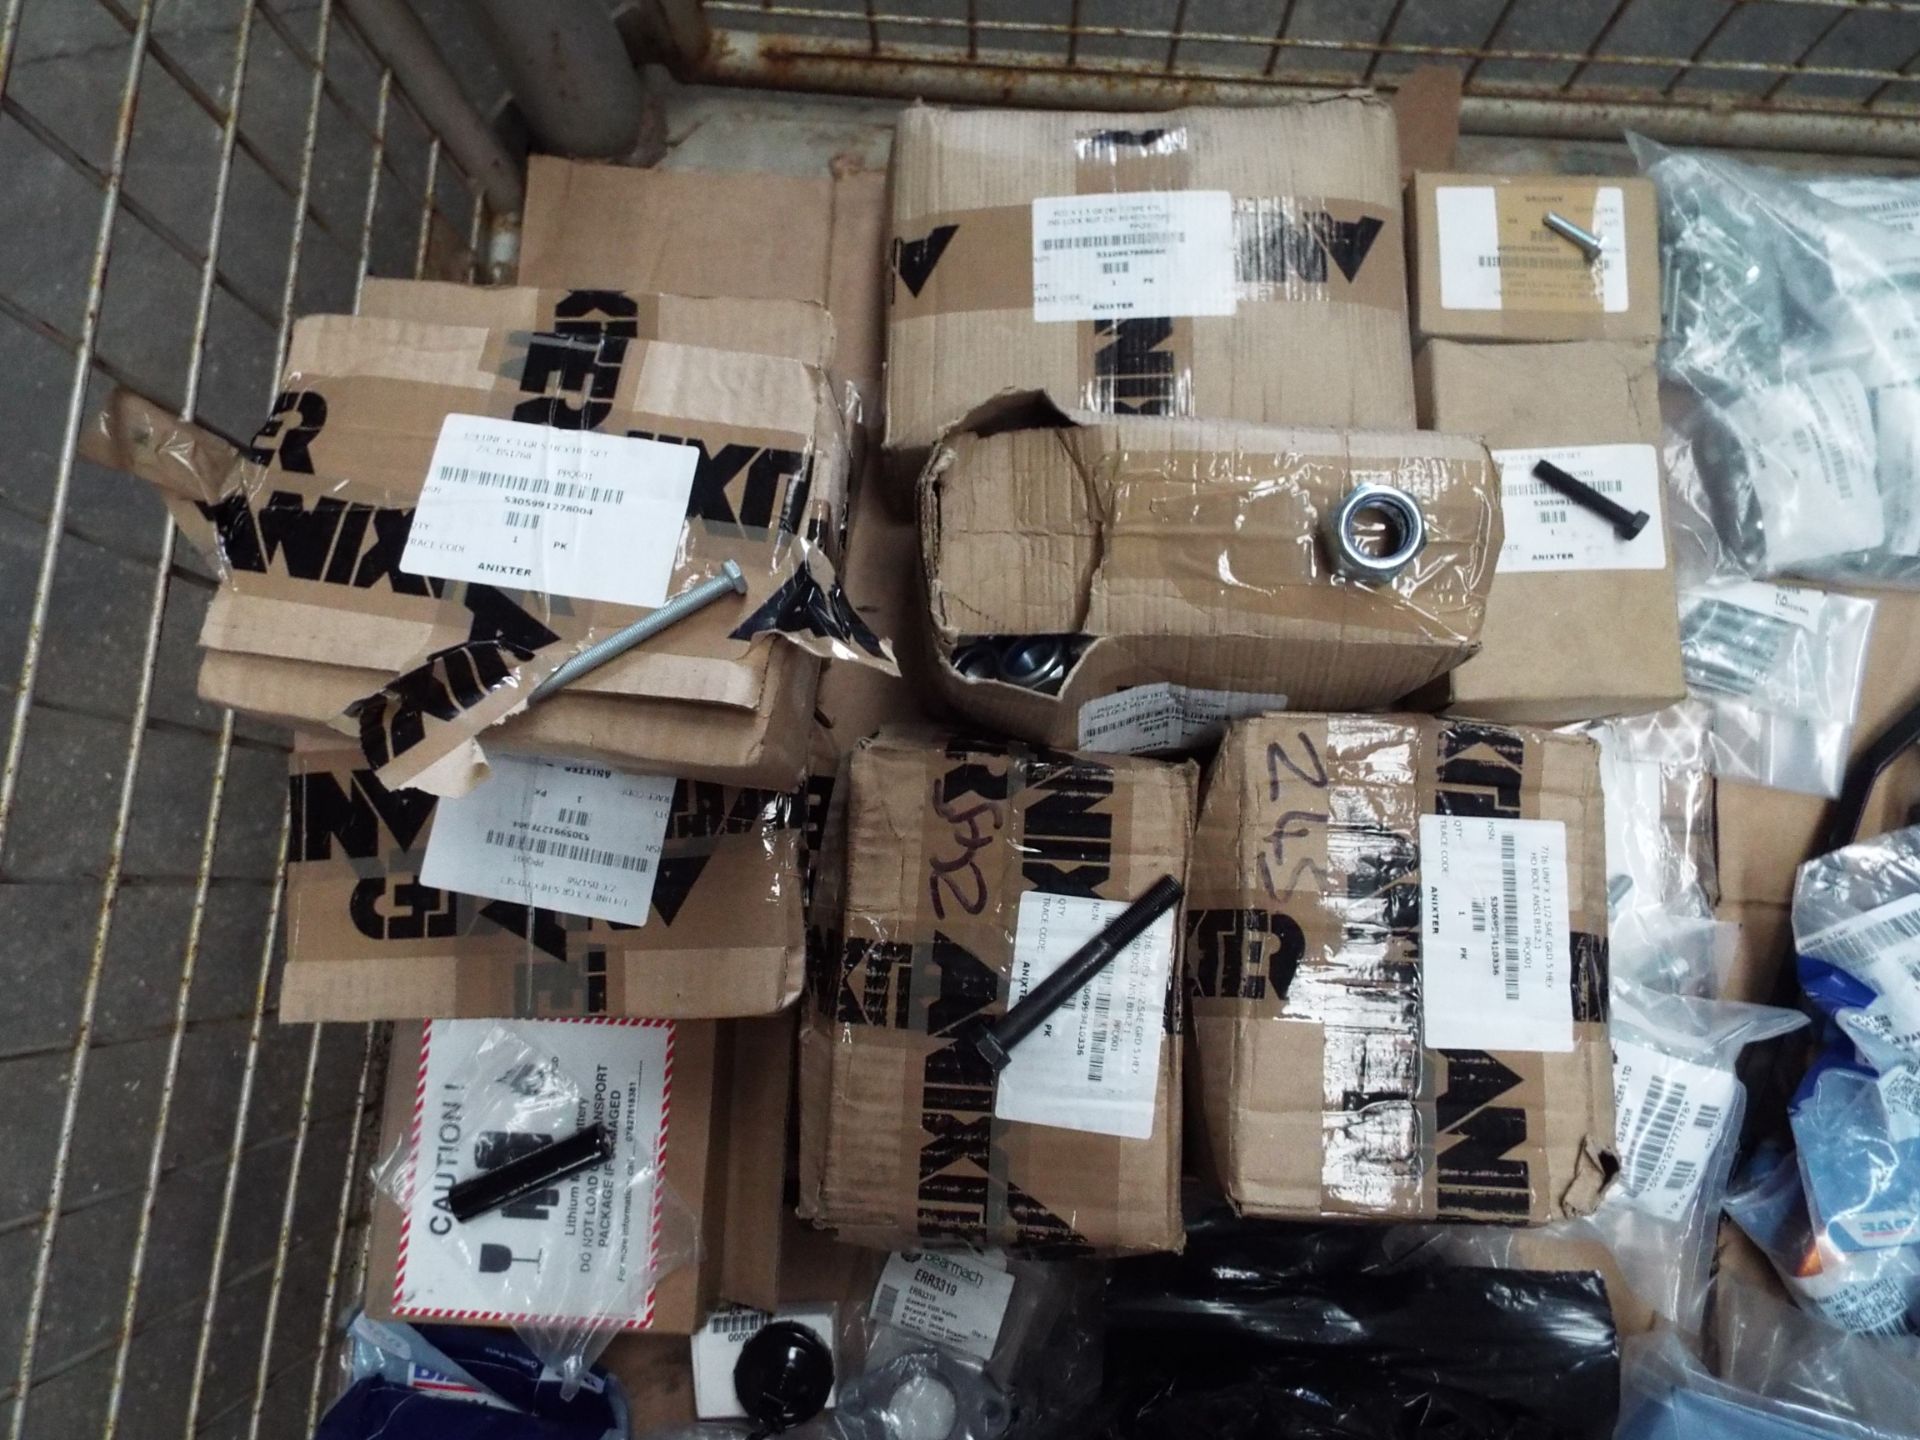 Mixed Stillage of Truck Parts inc Nuts, Bolts, Lamps, Clamps etc - Image 2 of 7